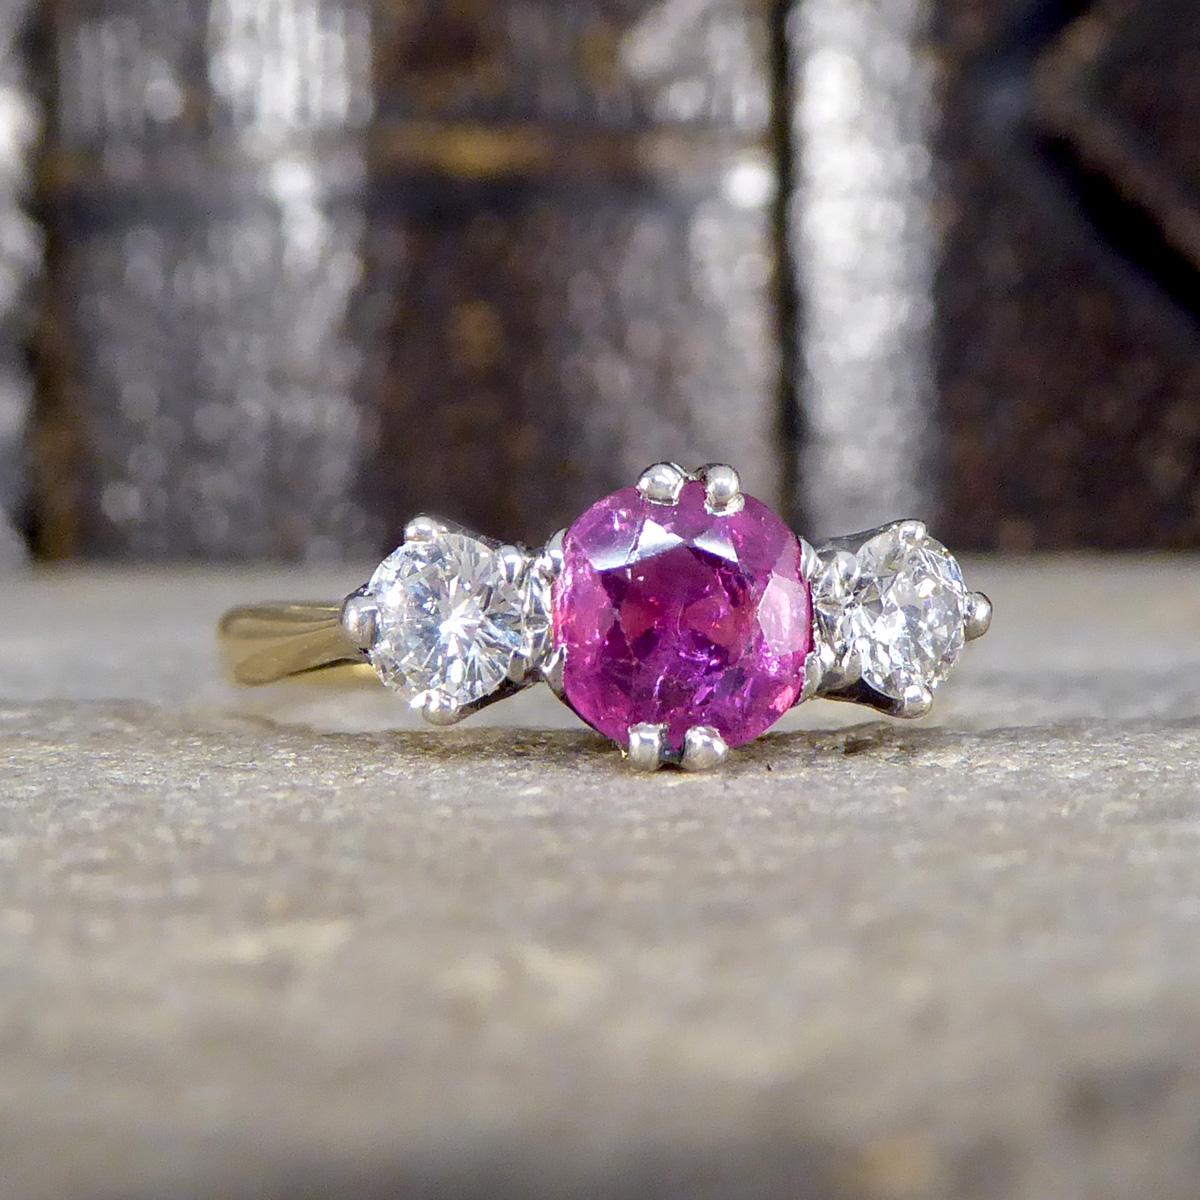 This exquisite early 20th century Ruby and Diamond three stone ring showcases the timeless elegance and craftsmanship of the era. Set in luxurious 18ct yellow gold and platinum, the ring features a beautifully balanced design that exudes